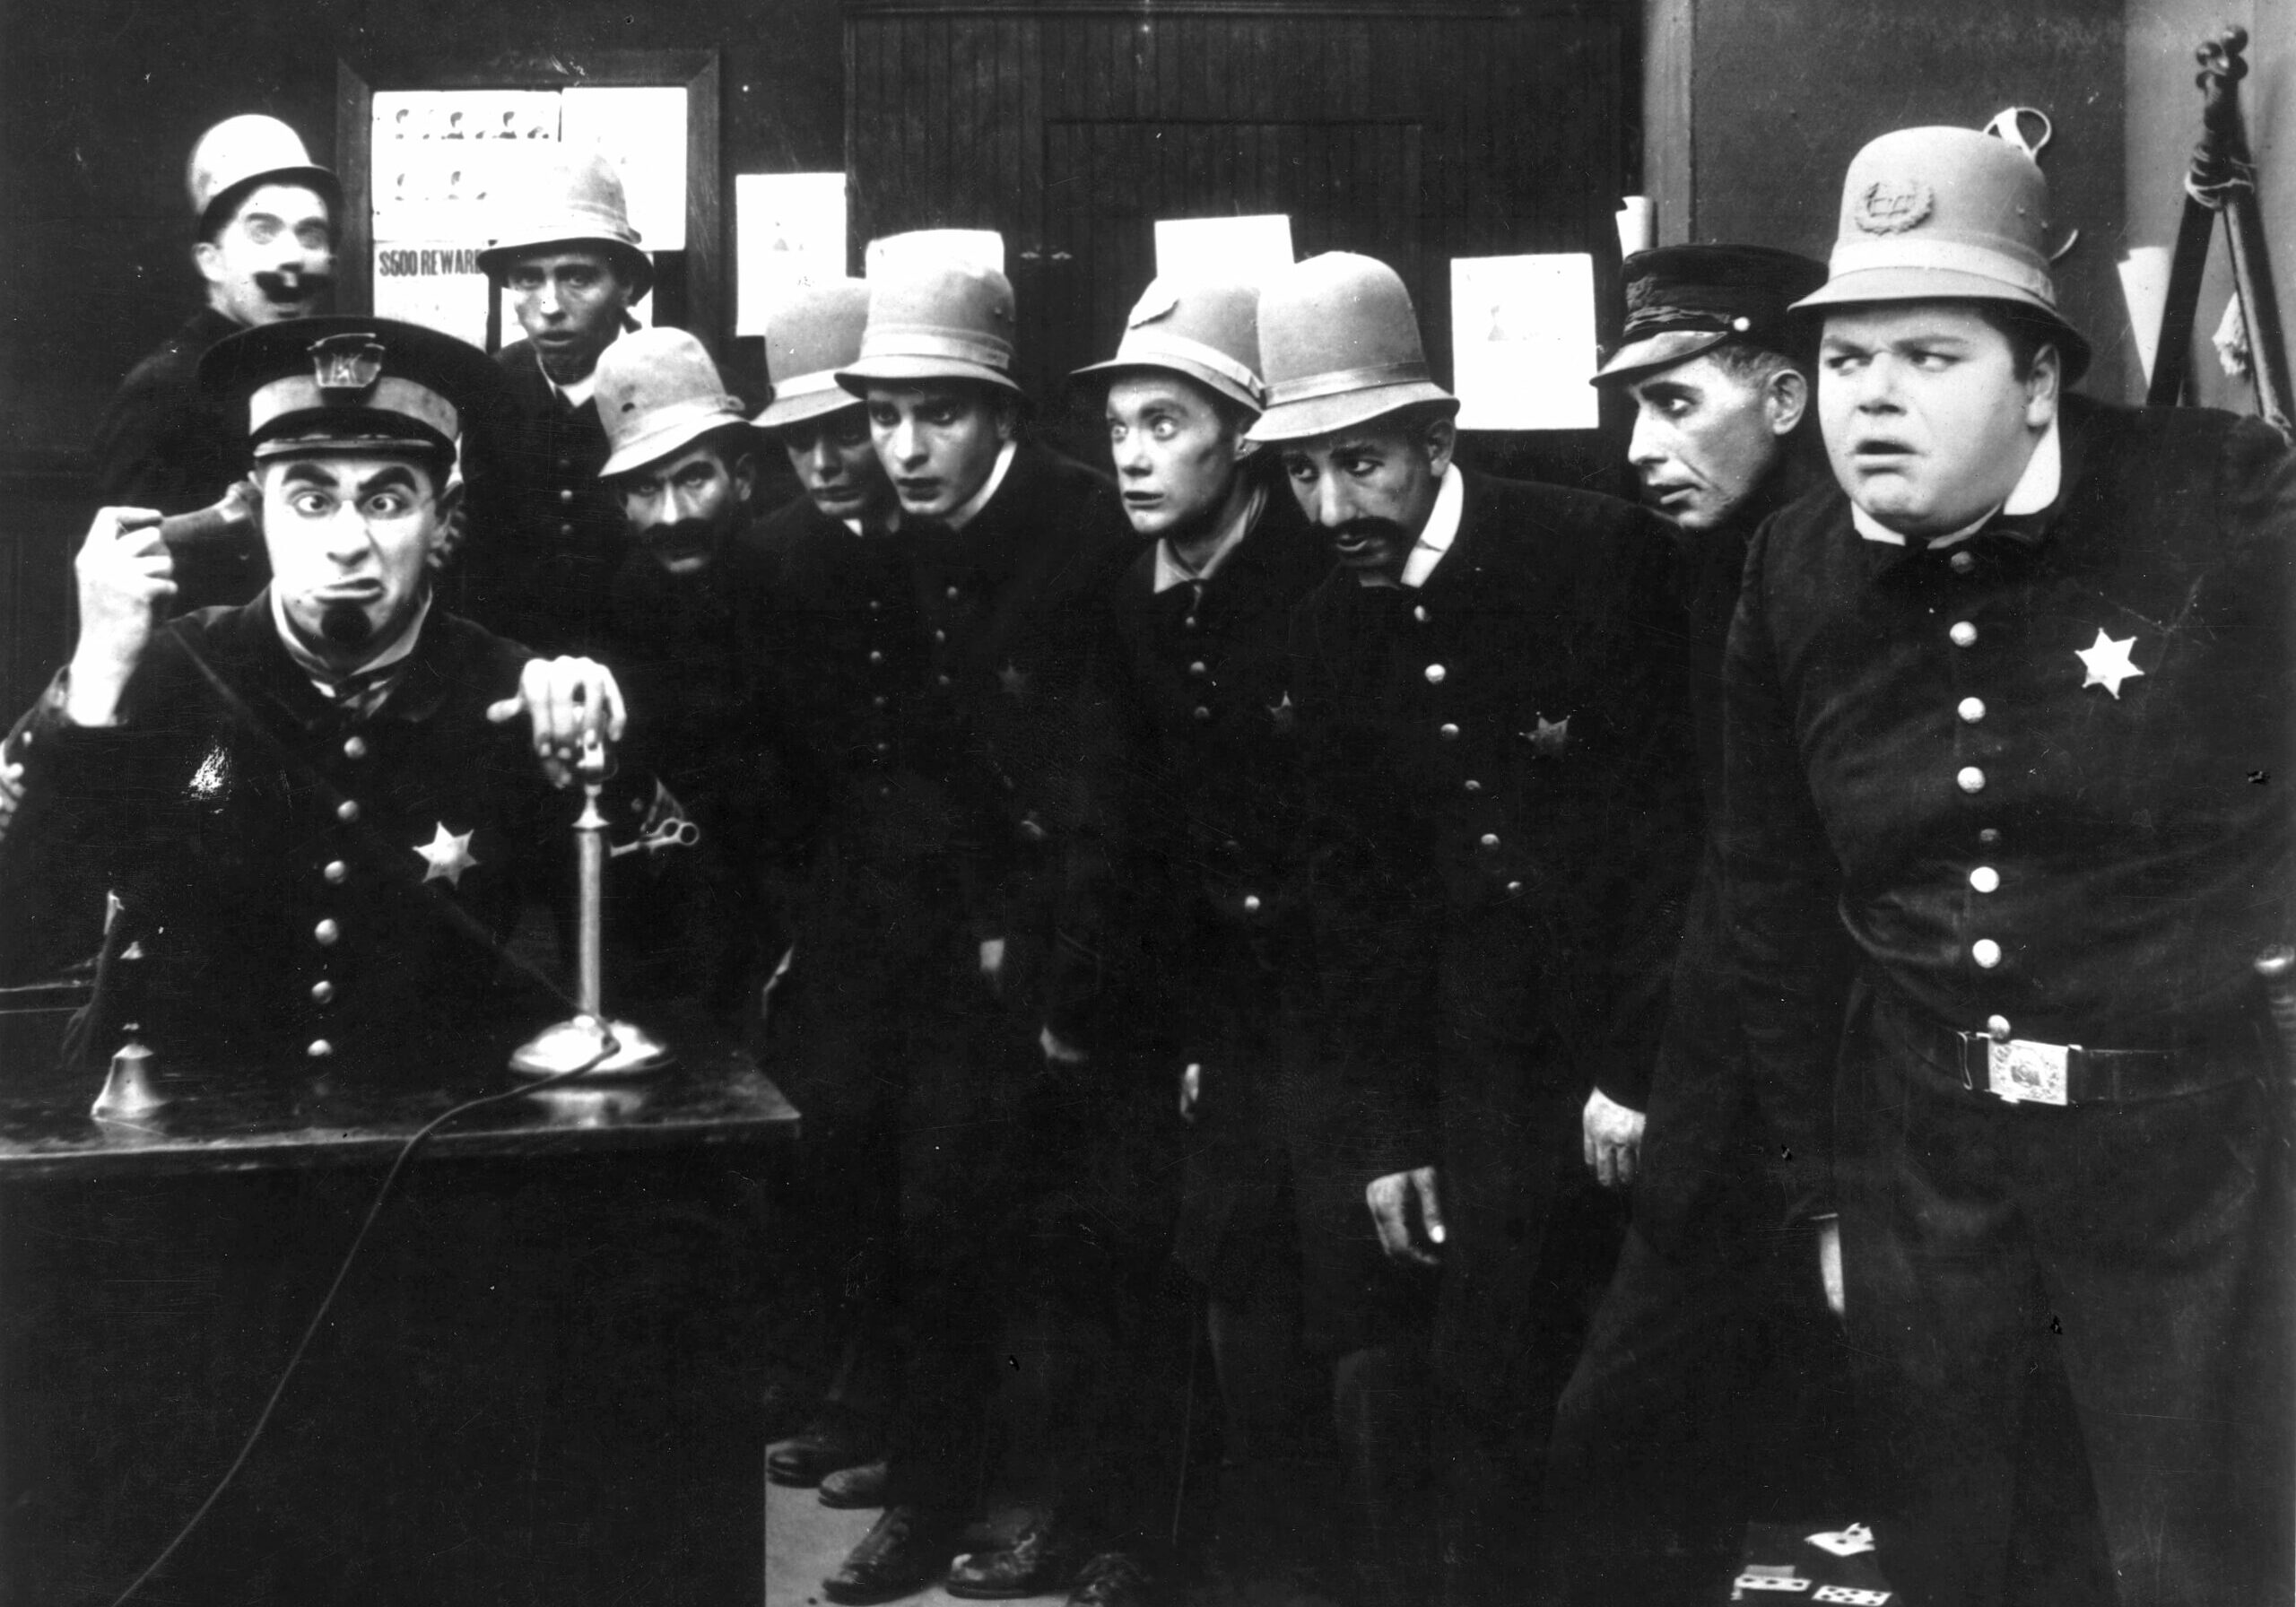 A scene from 'In the Clutches of the Gang', a Keystone Cops silent comedy directed by George Nichols and Mack Sennett. Left to right : Ford Sterling (on phone), Edgar Kennedy, George Jeskey, Al St John, Hank Mann, Rube Miller, and Roscoe Fatty Arbuckle (1887 - 1933).   (Photo by Hulton Archive/Getty Images)